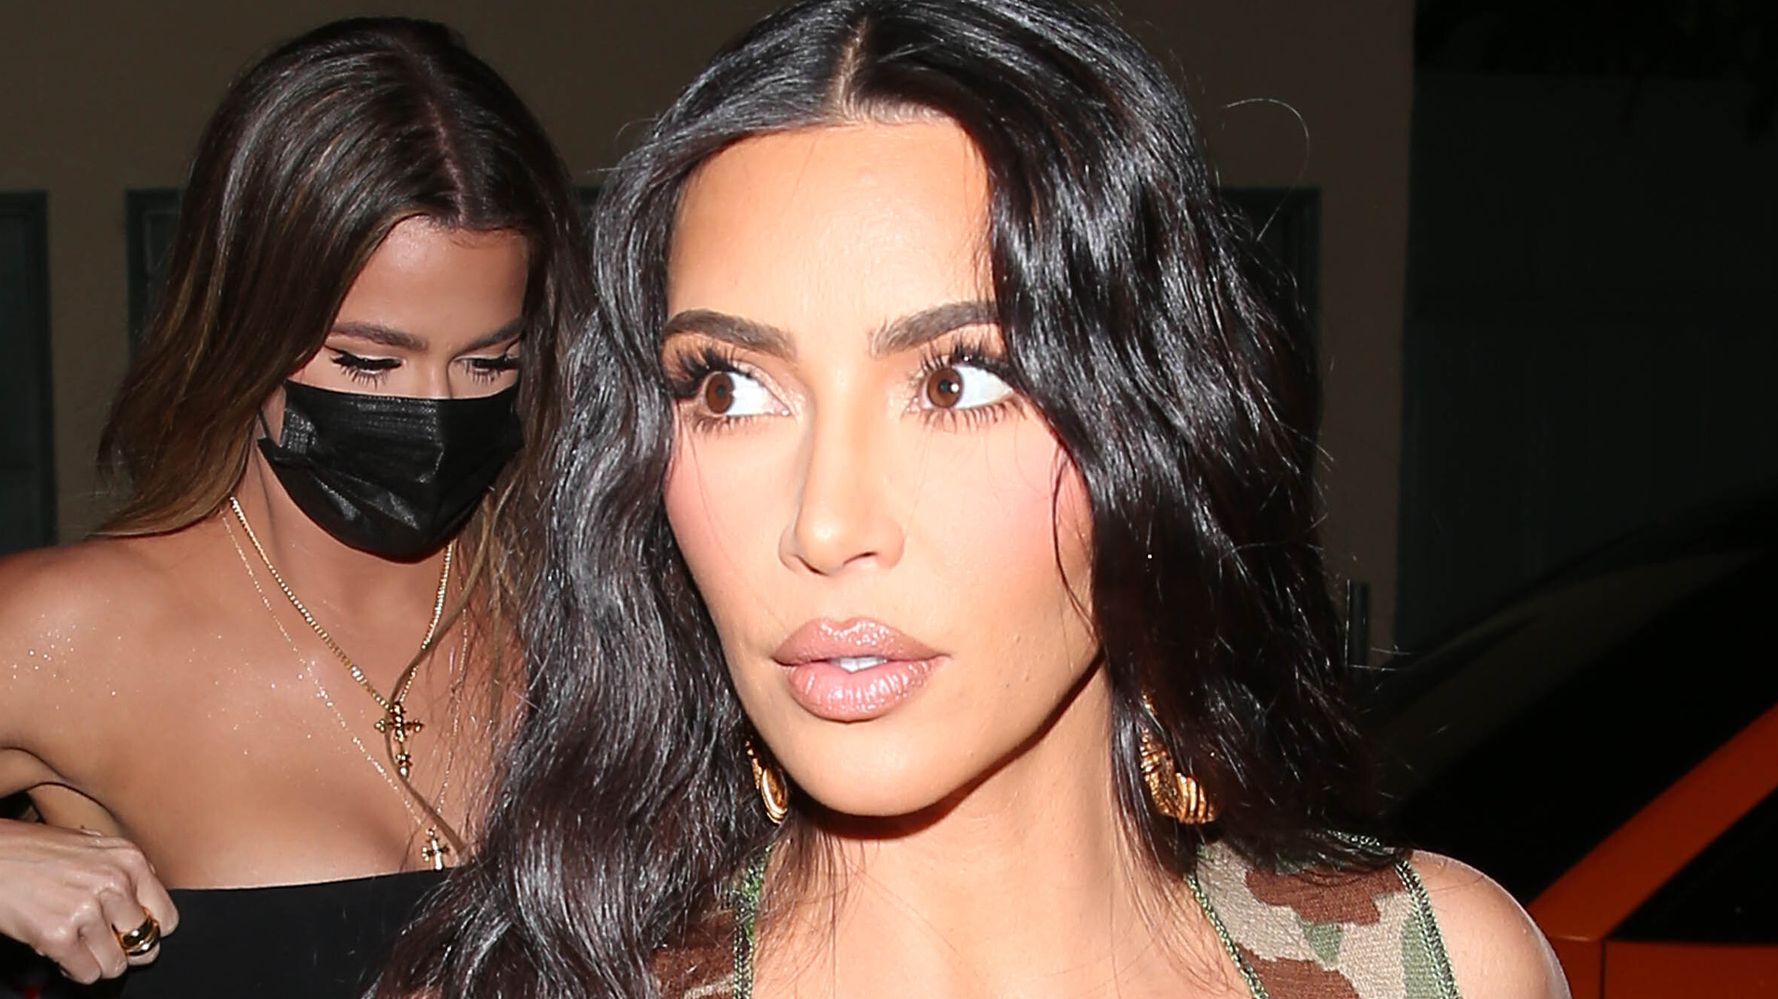 Kim Kardashian Wears Mask With Zipper Face Holes To Support Ex Kanye West